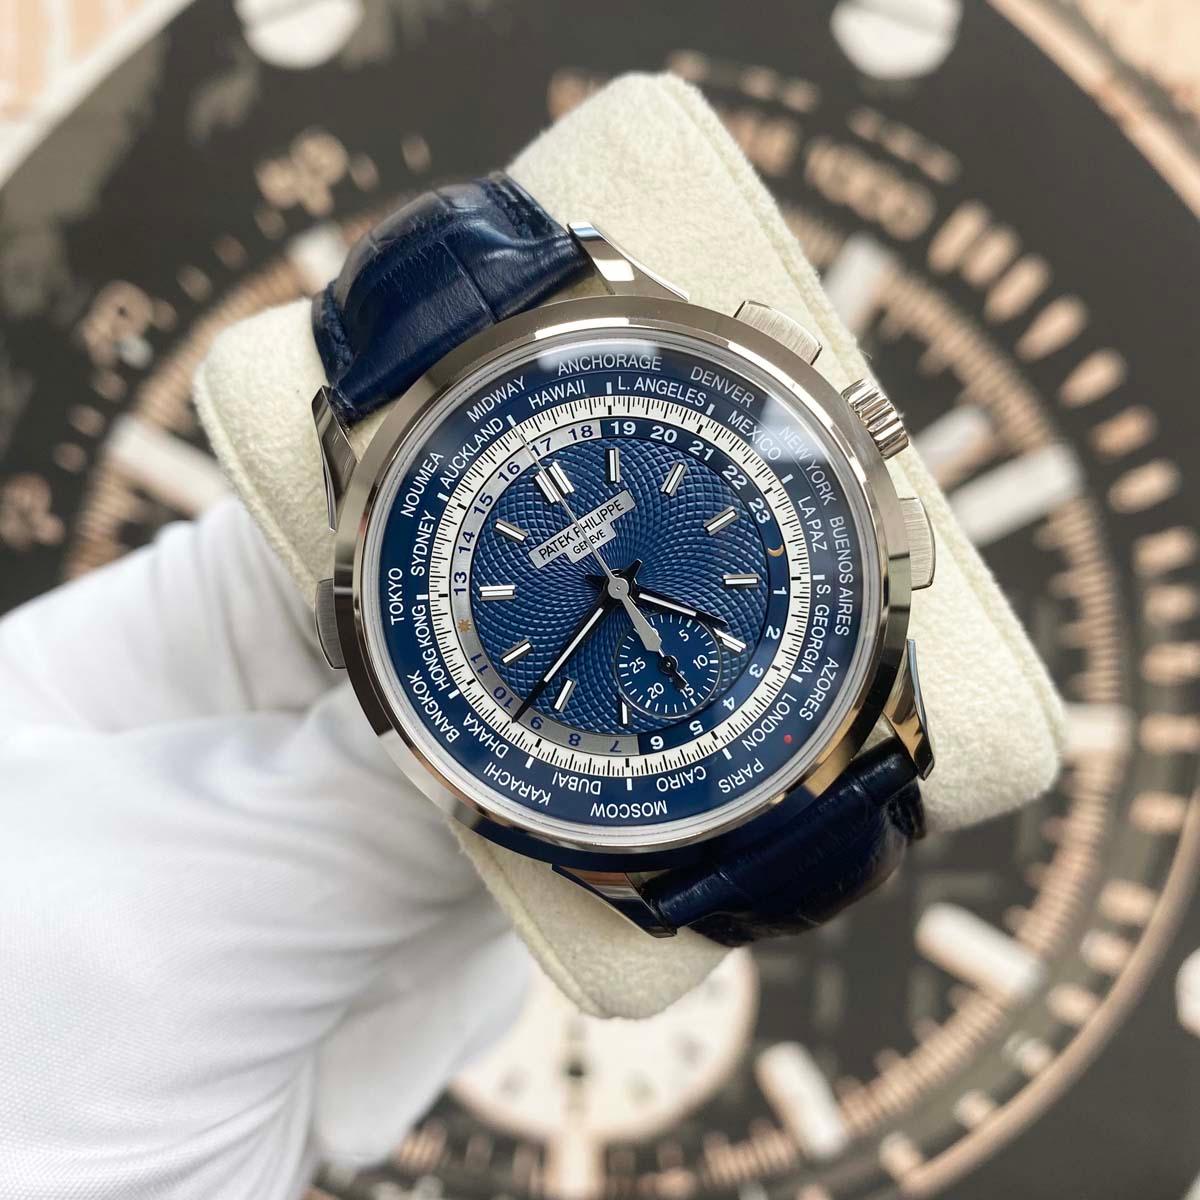 Patek Philippe World Time Chronograph Complication 39mm 5930G Blue Dial Pre-Owned - Gotham Trading 